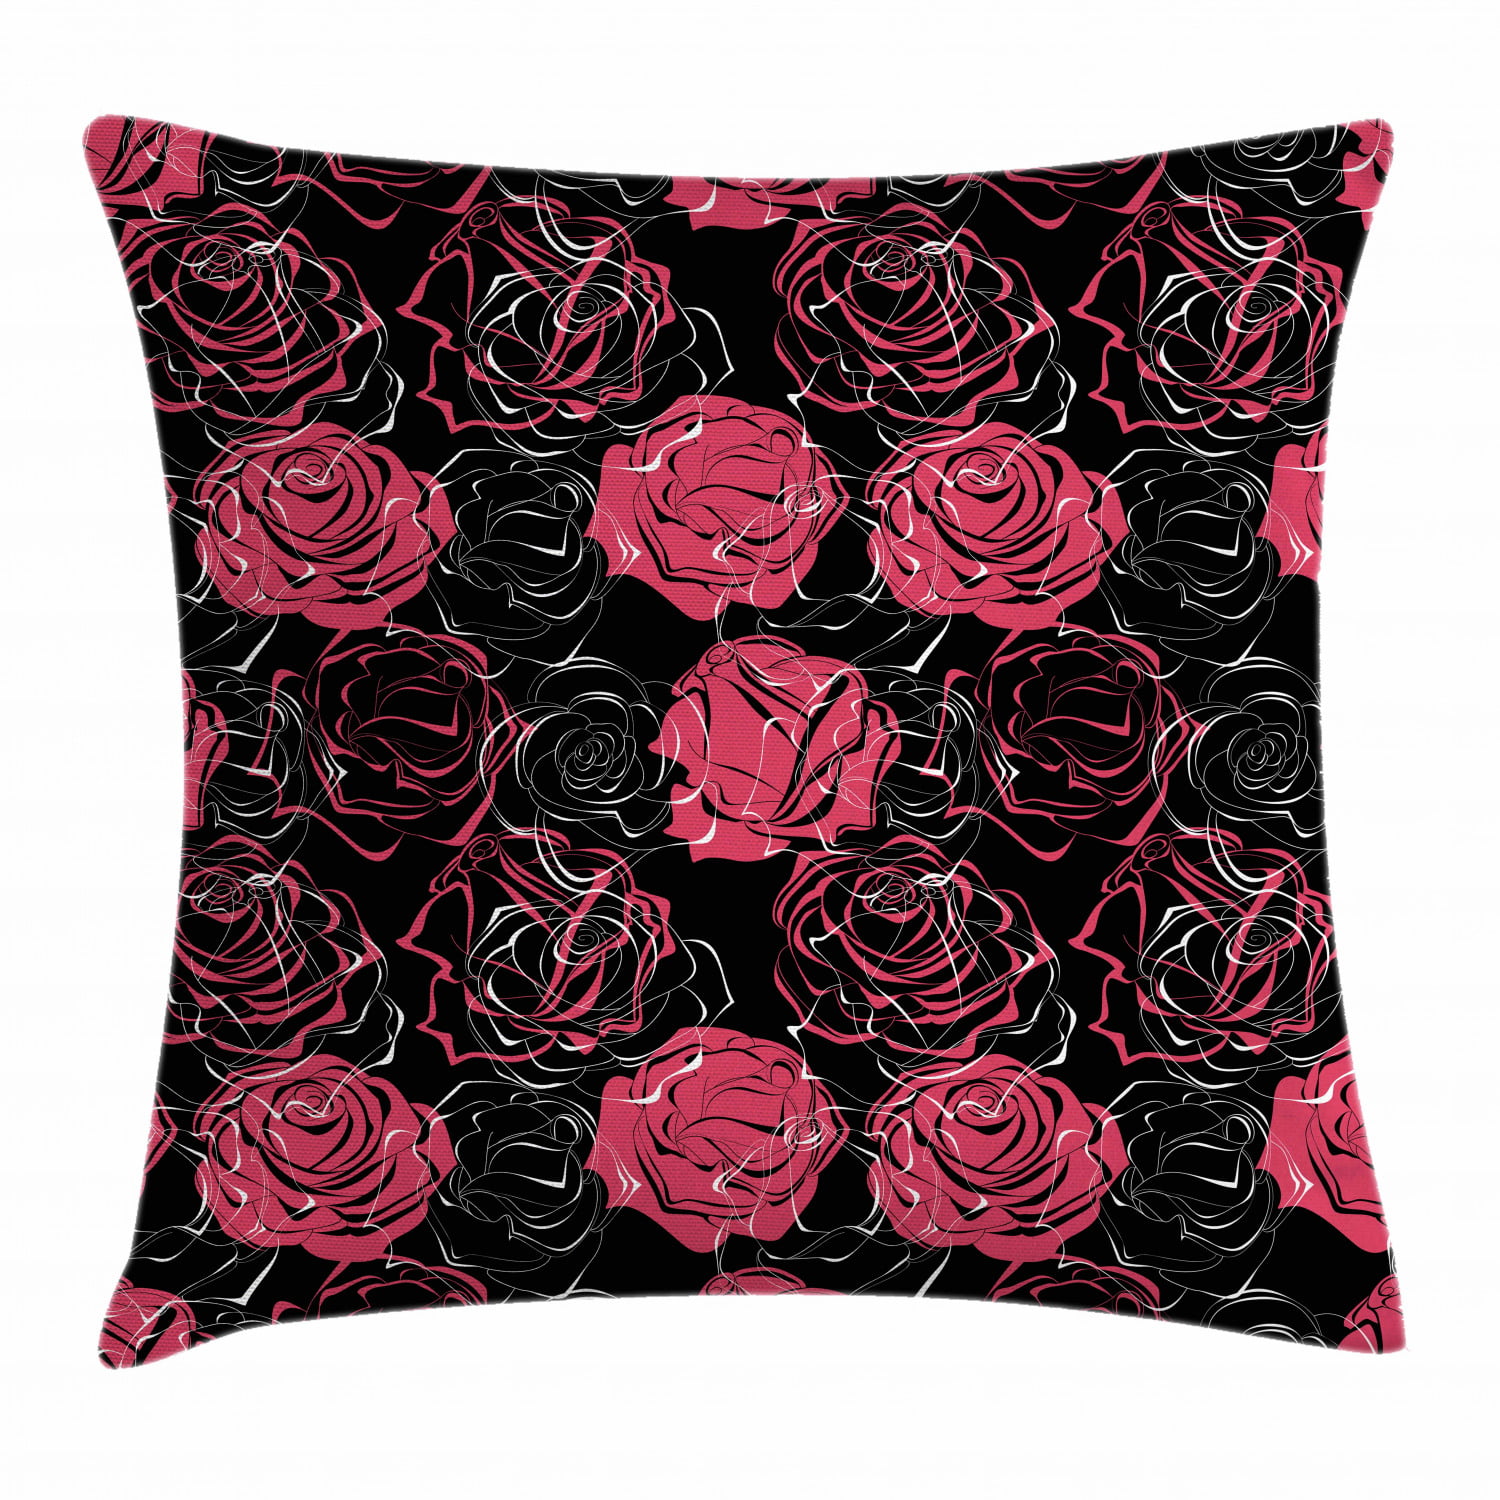 Awesome Red Roses Flower Lover Designs Beautiful Red Rose Flower Bloom Florist Lover Throw Pillow 16x16 Multicolor 